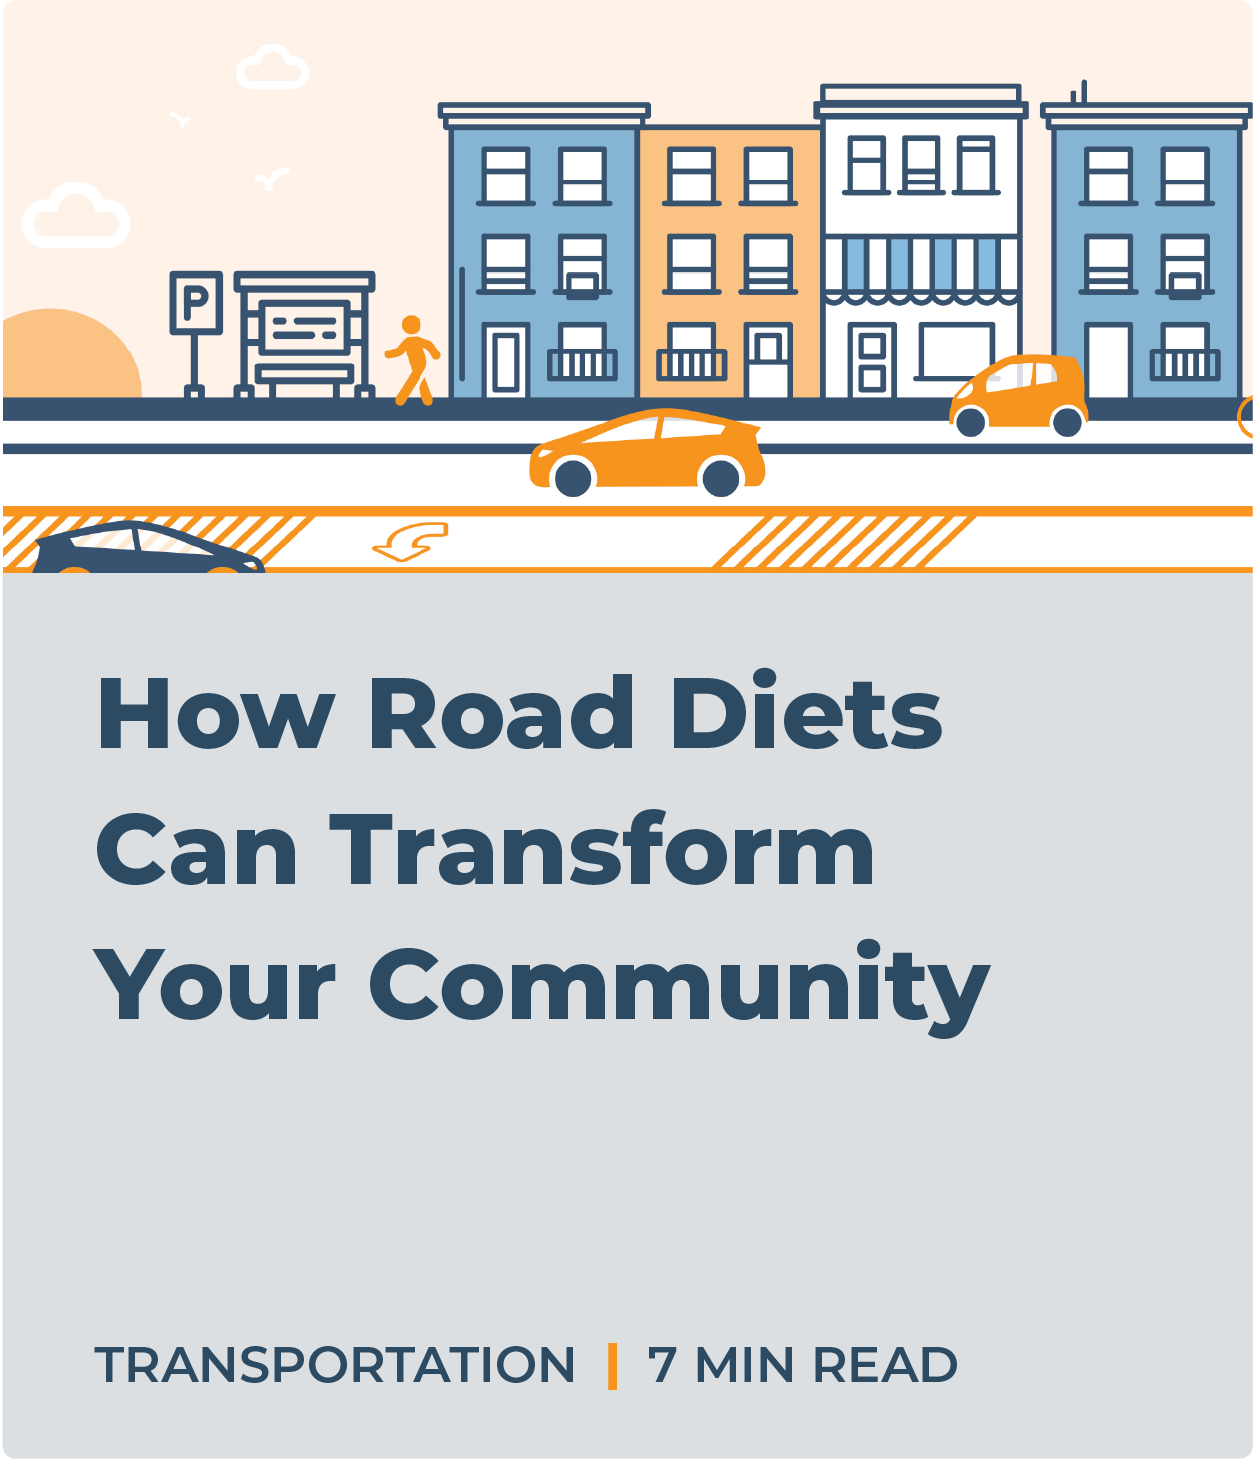 How Road Diets Can Transform Your Community